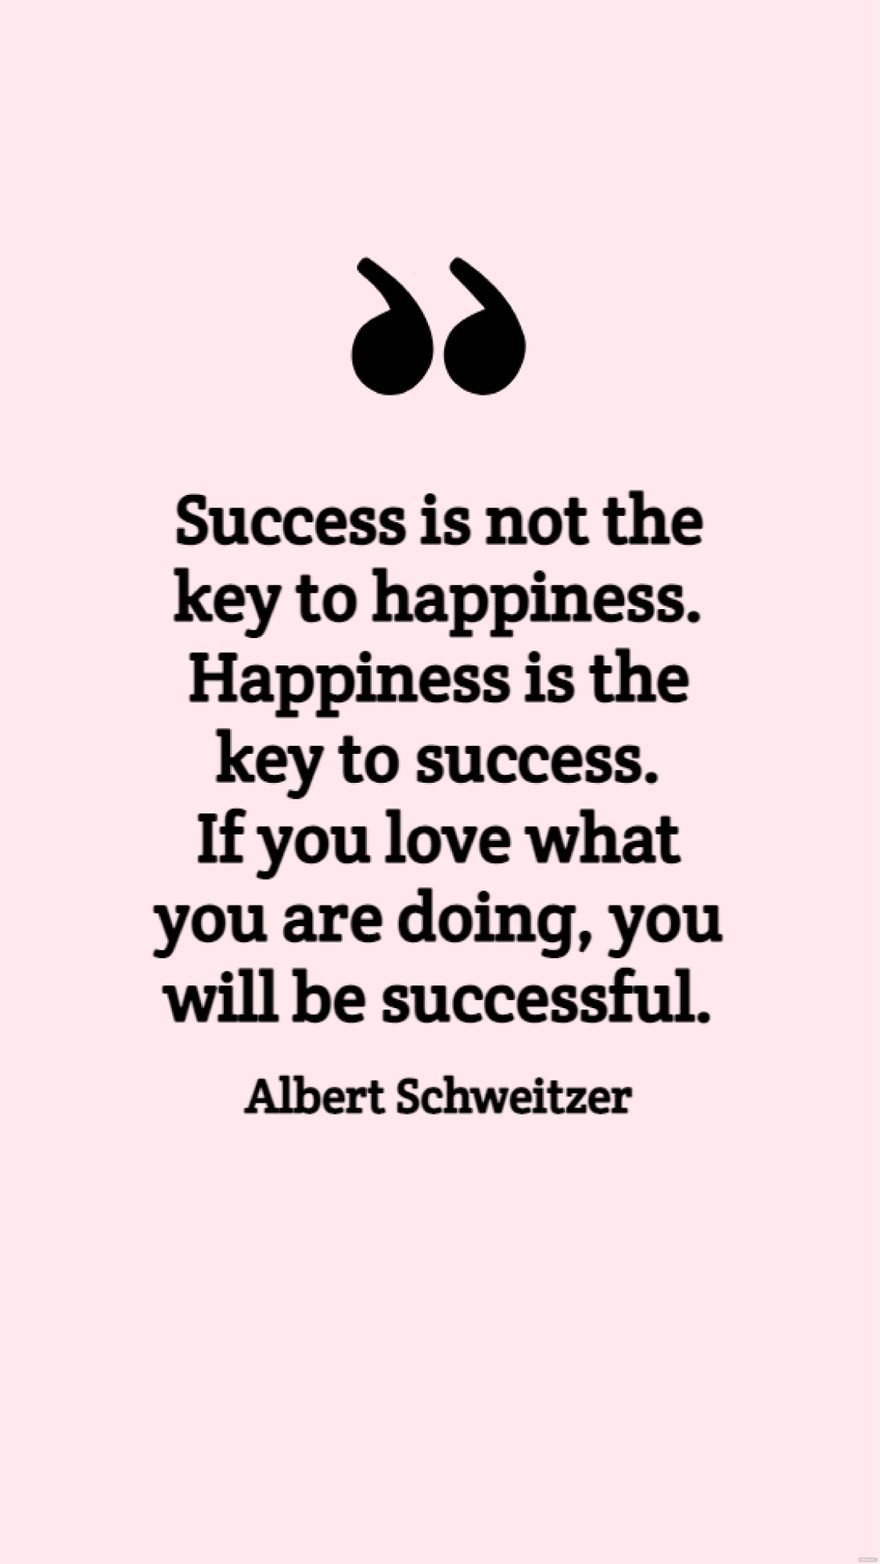 Albert Schweitzer - Success is not the key to happiness. Happiness is the key to success. If you love what you are doing, you will be successful.